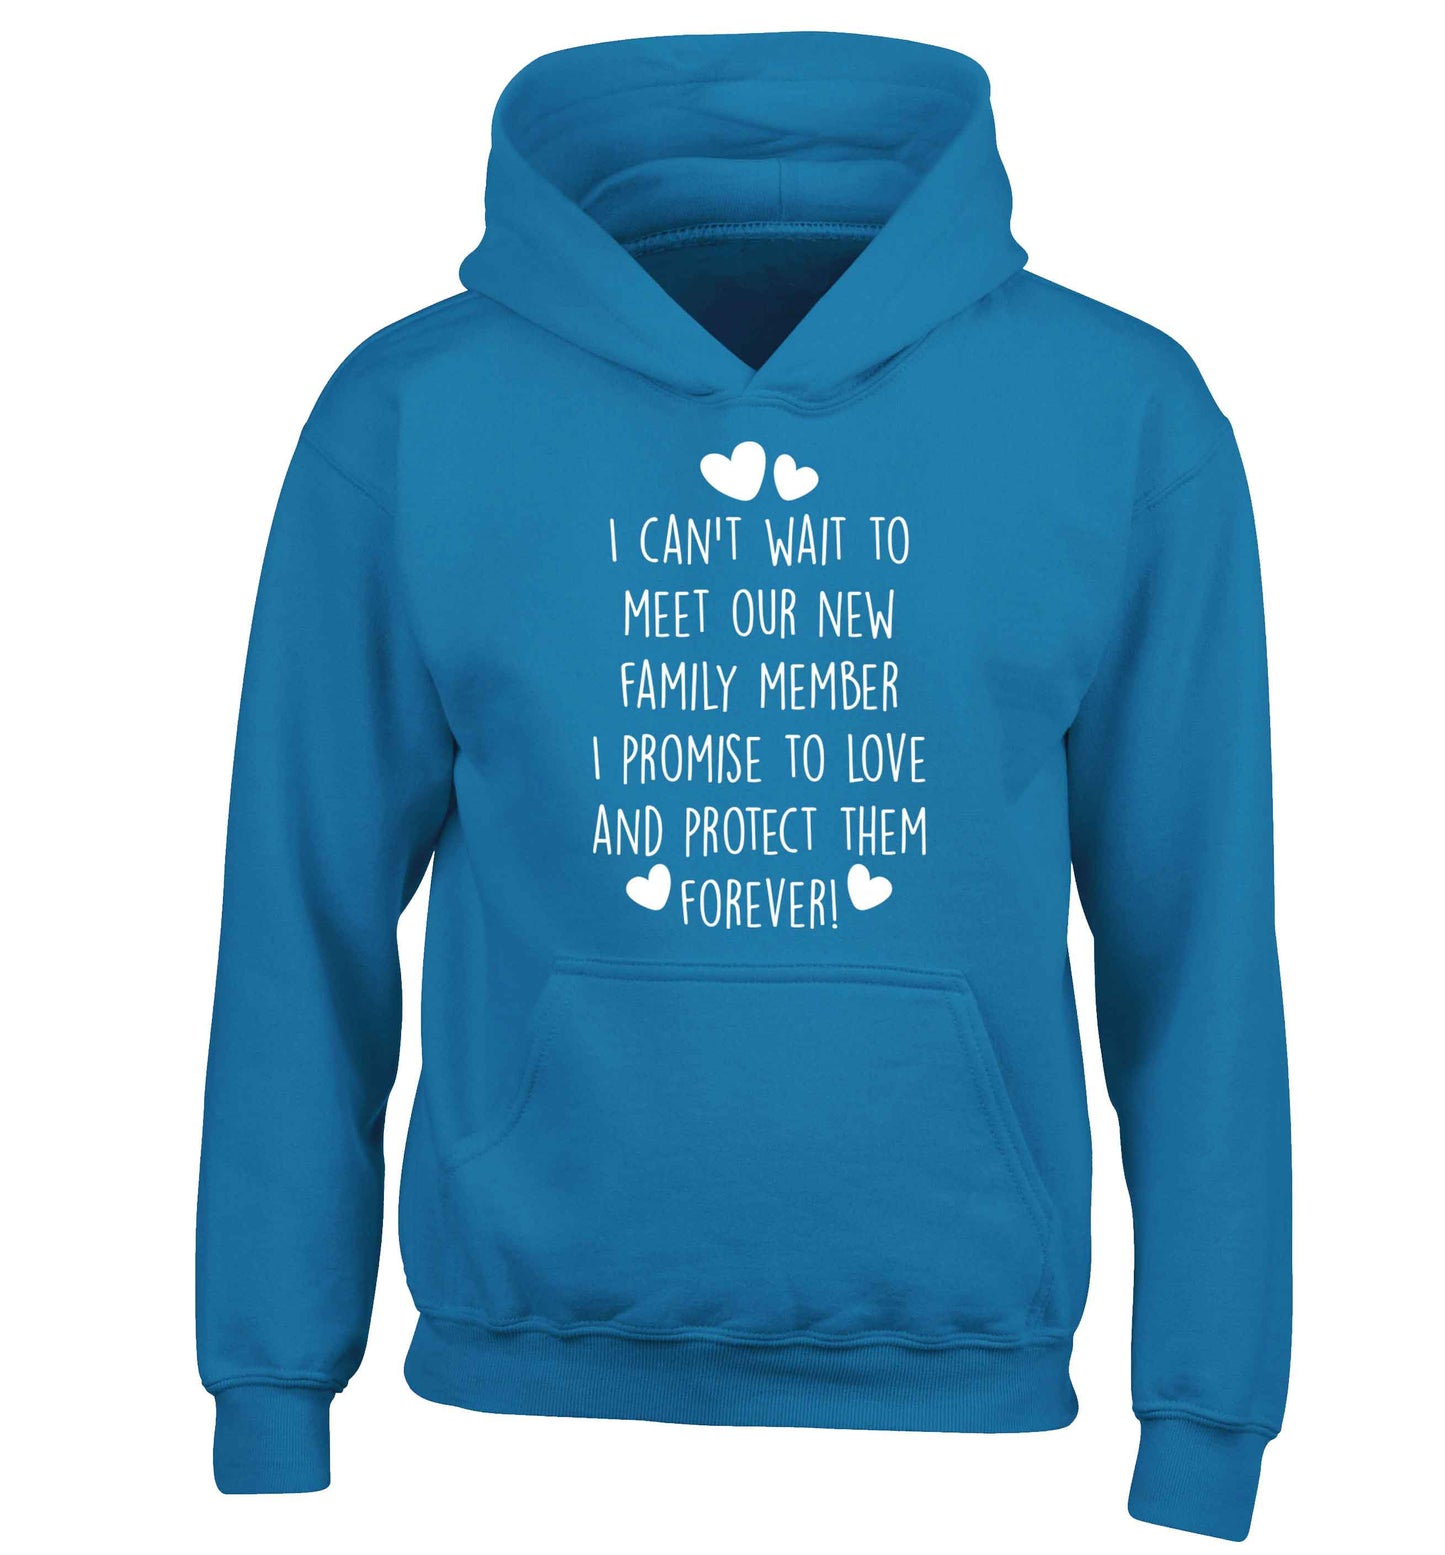 I can't wait to meet our new family member I promise to love and protect them foreverchildren's blue hoodie 12-13 Years